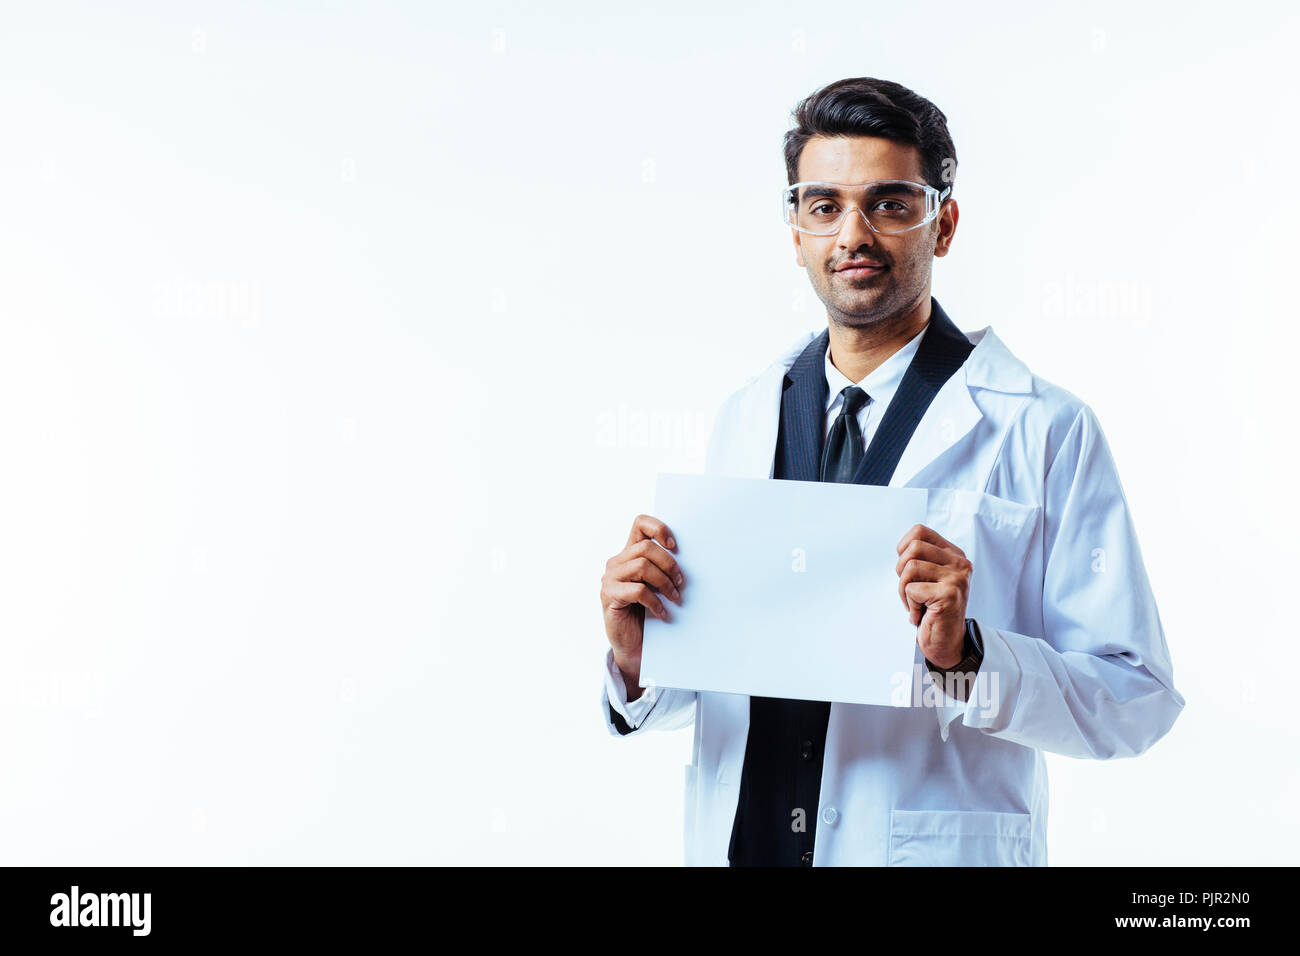 Portrait of a man in business suit, lab coat and protective glasses, looking at camera, holding a white cardboard, isolated on white studio background Stock Photo